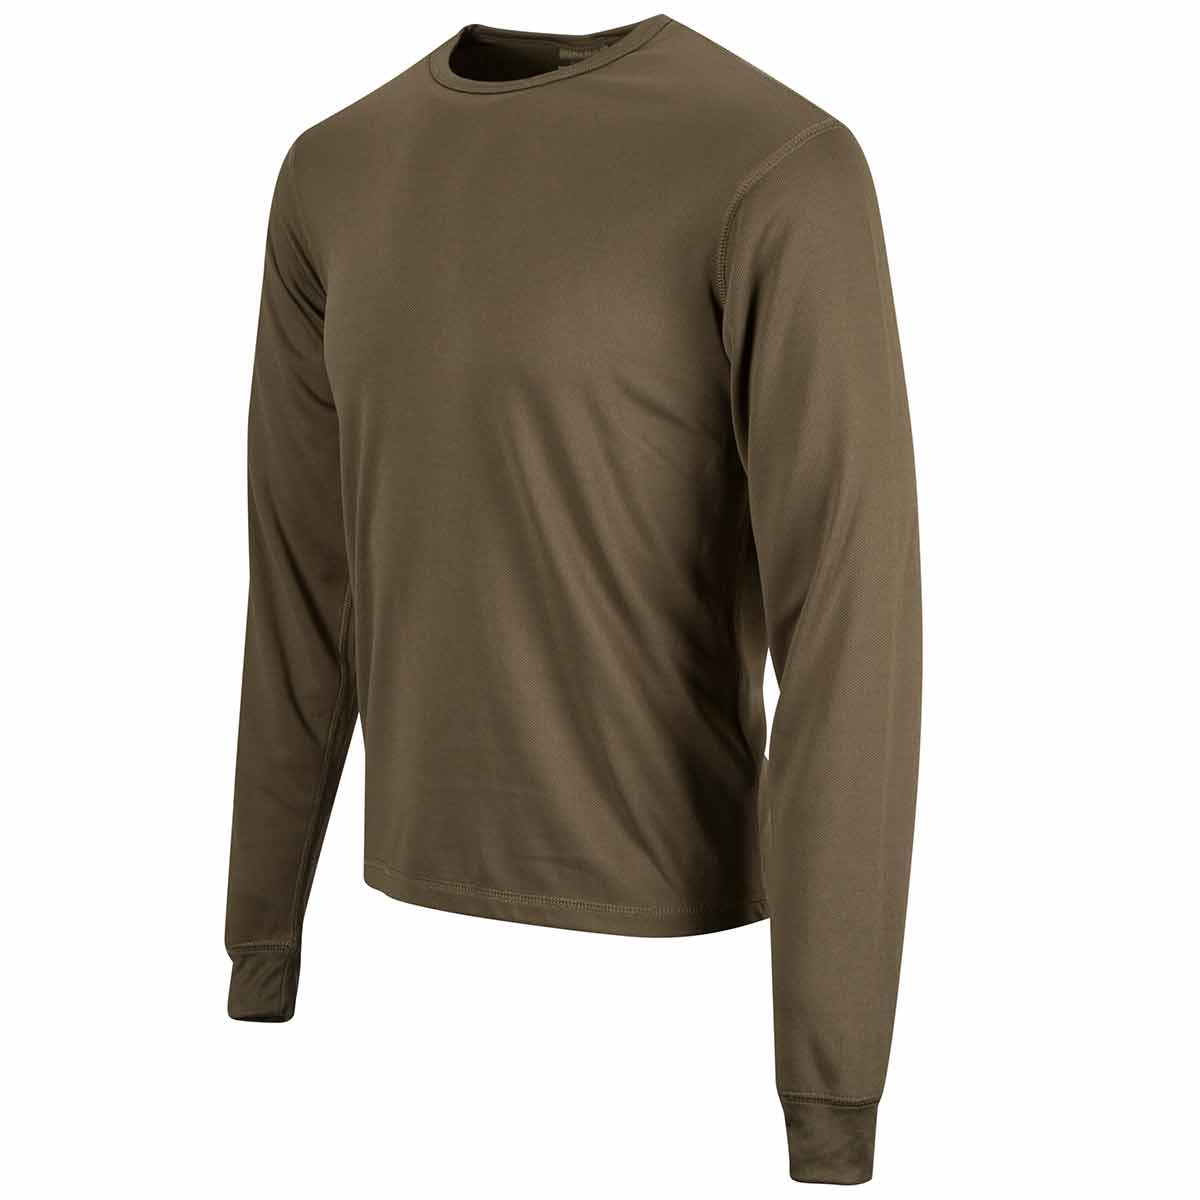 British Army Thermal Vest Base Layer Long Sleeve Top Olive Green ...